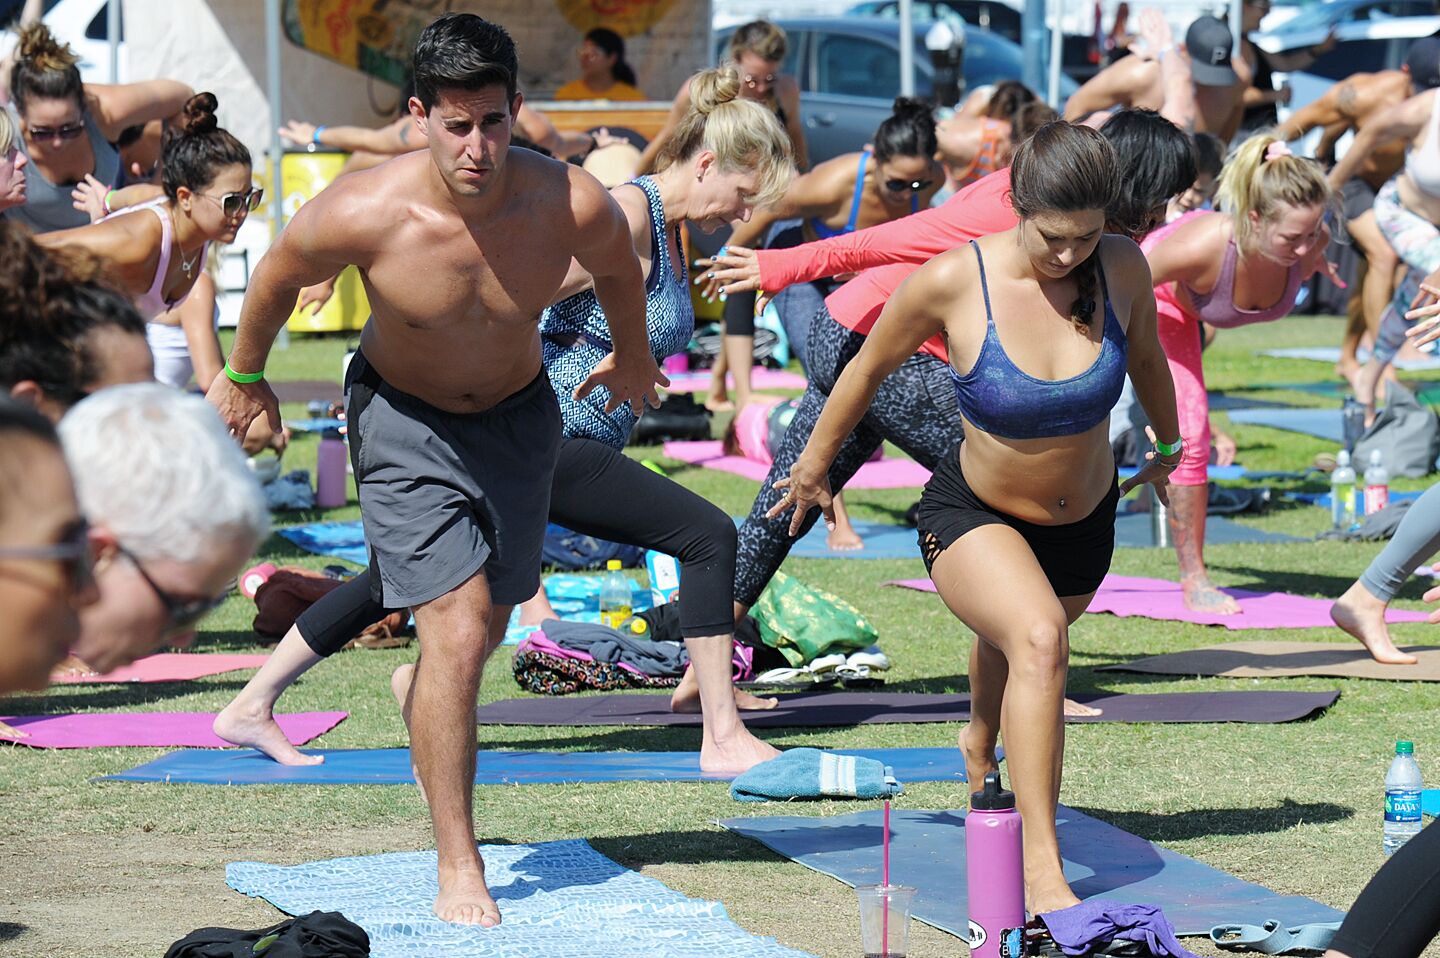 Yogis got their downward dog on at the One Love Movement's 8th Annual Charity Yoga & Live Music Event at Waterfront Park on Saturday, Sept. 21, 2019.